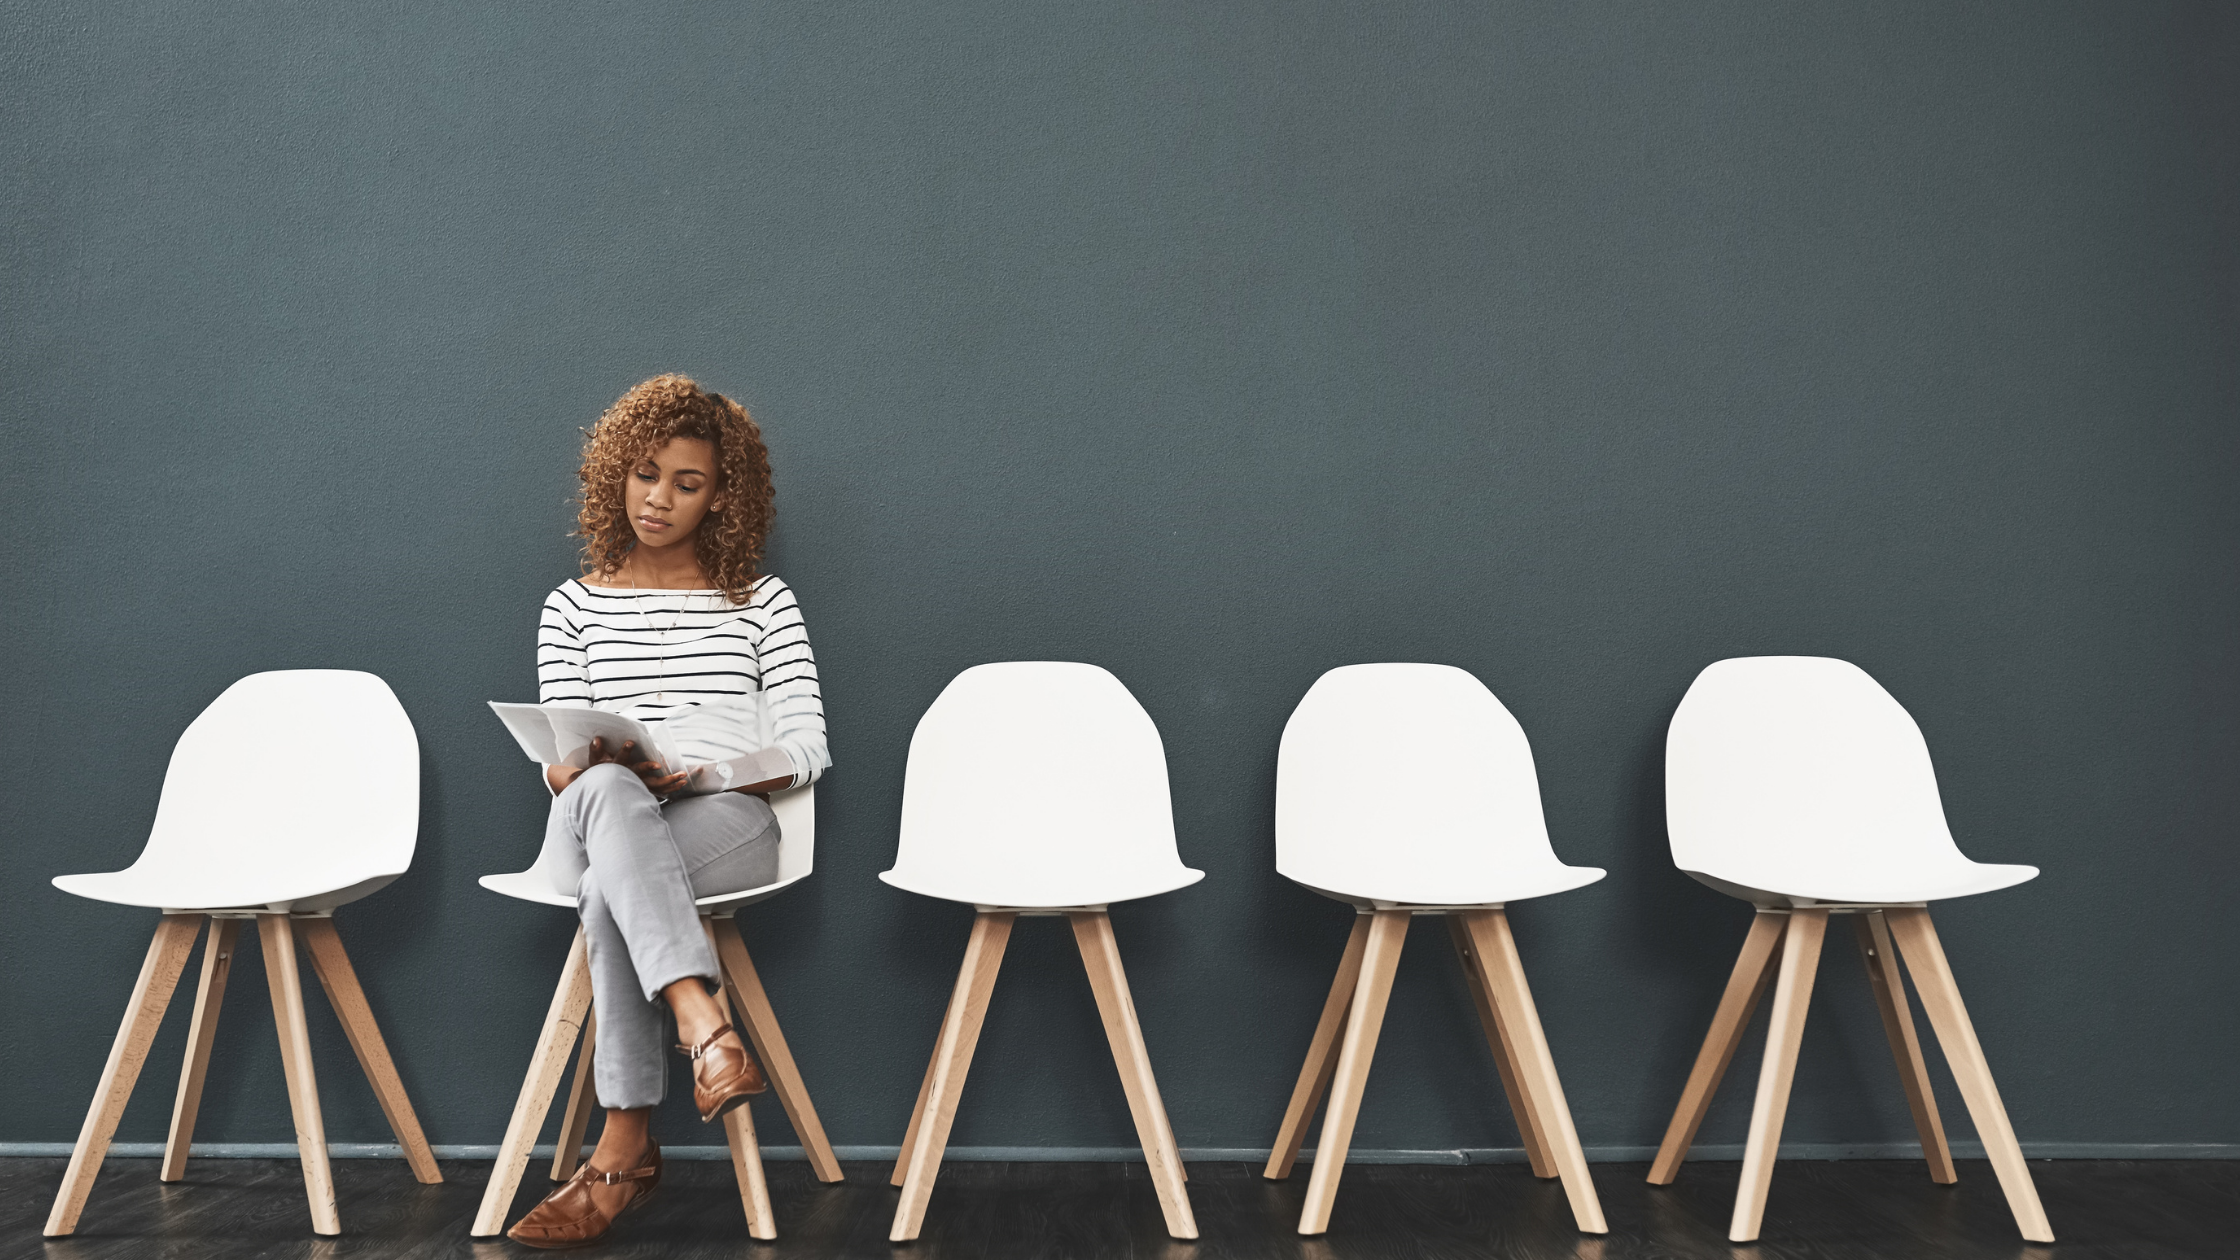 person waiting for an interview sitting on white chair